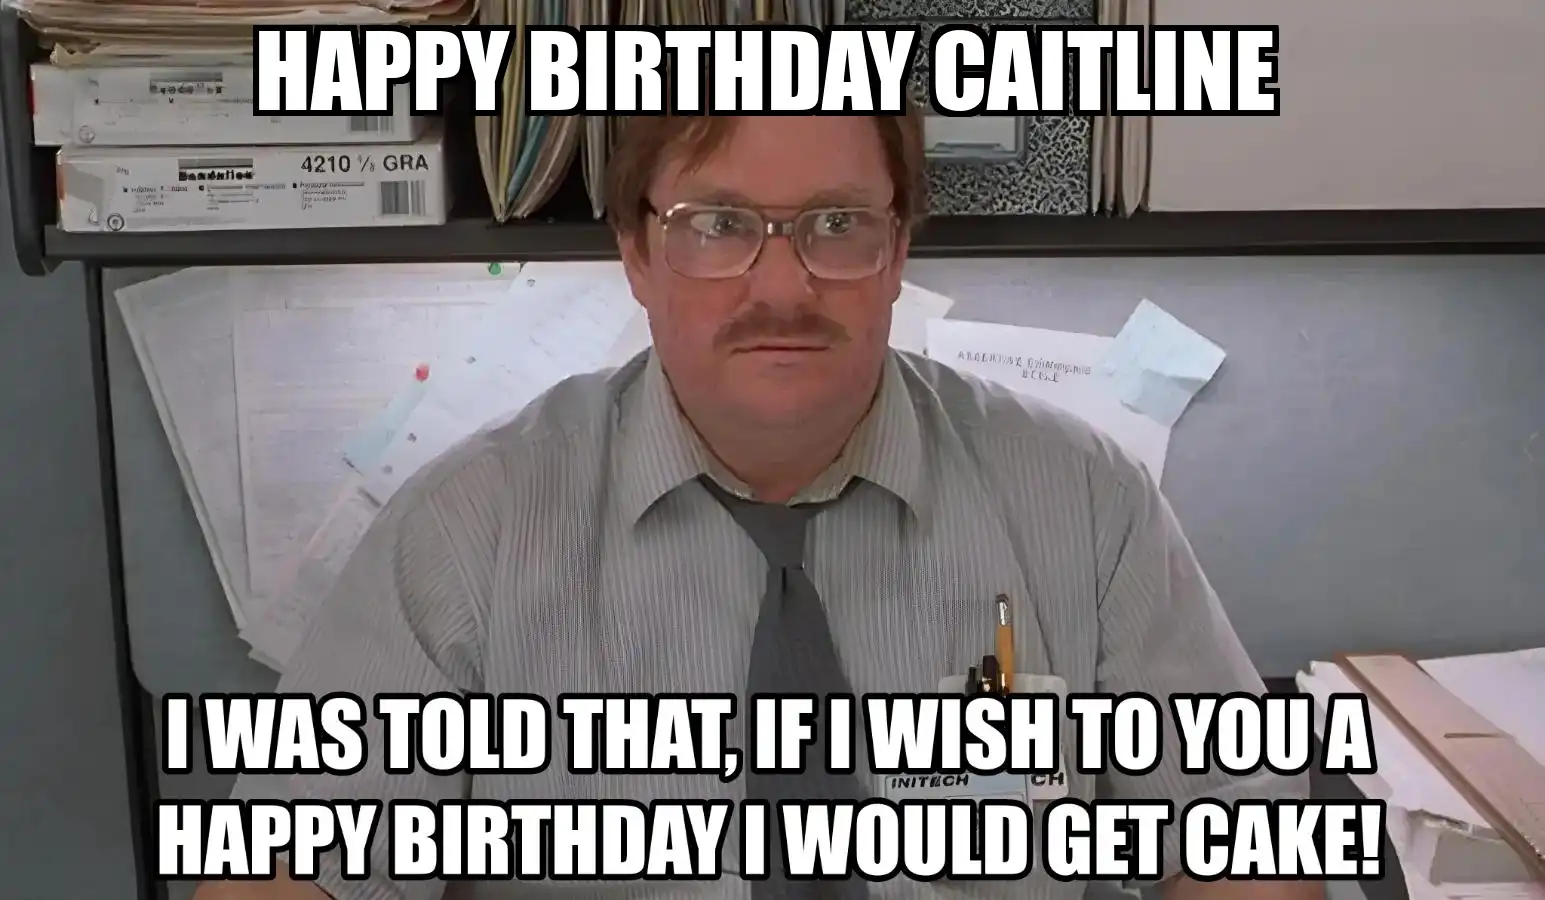 Happy Birthday Caitline I Would Get A Cake Meme